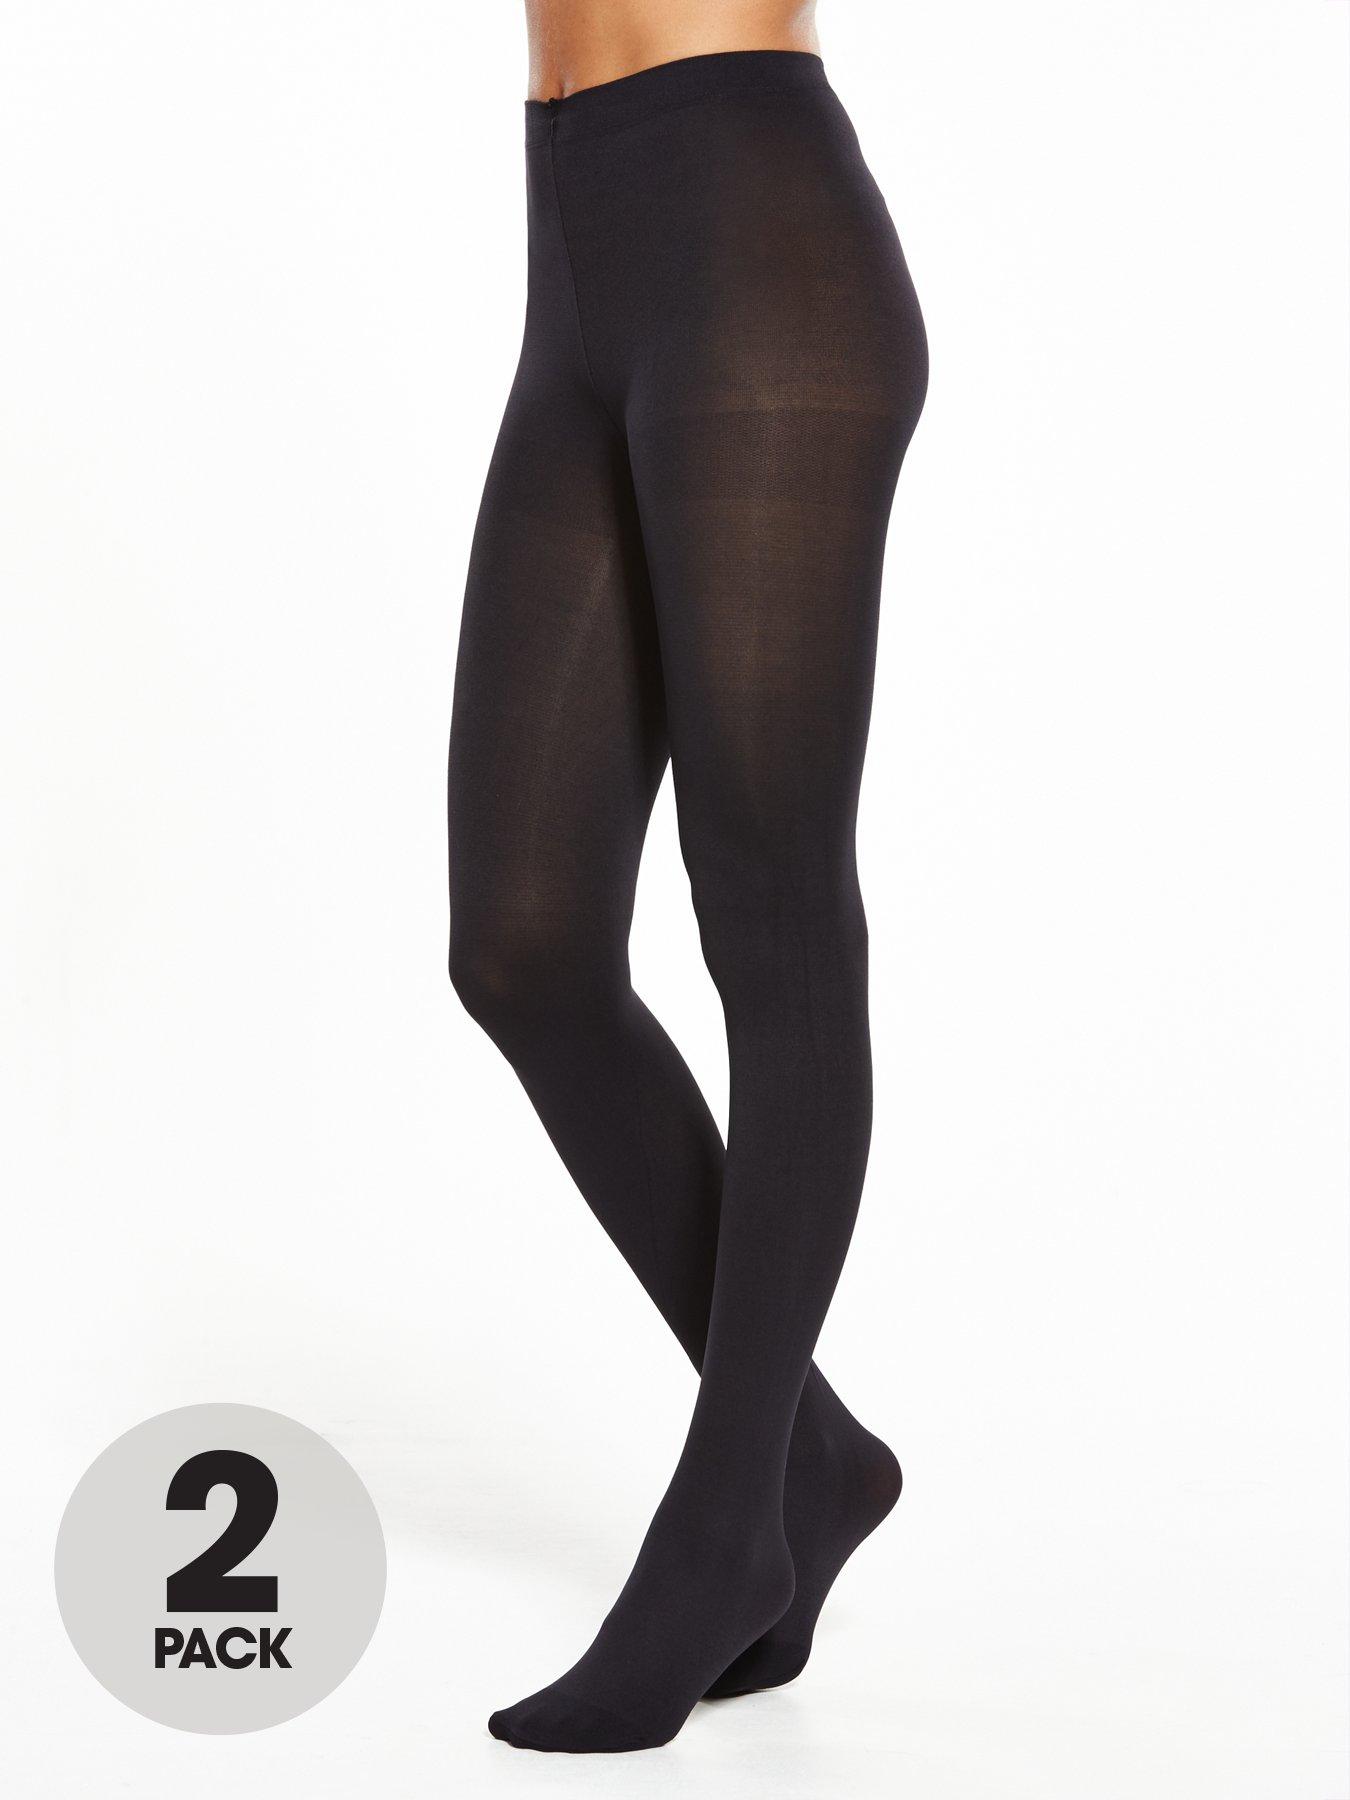 Plus Size Black 80 Denier Footless Tights Yours Clothing, 55% OFF